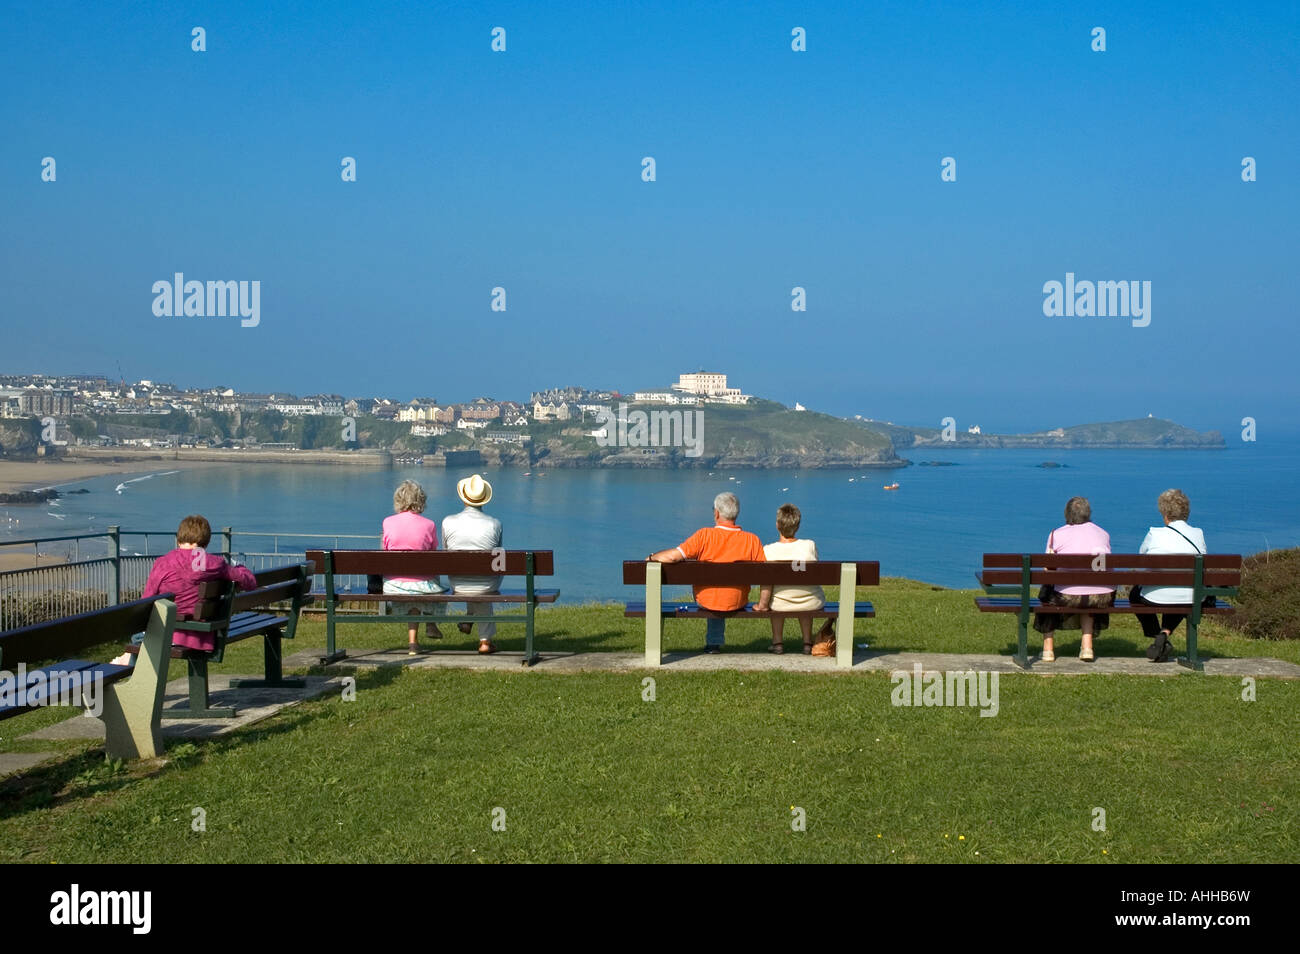 tourists sitting on seats overlooking the bay at newquay,cornwall,england Stock Photo